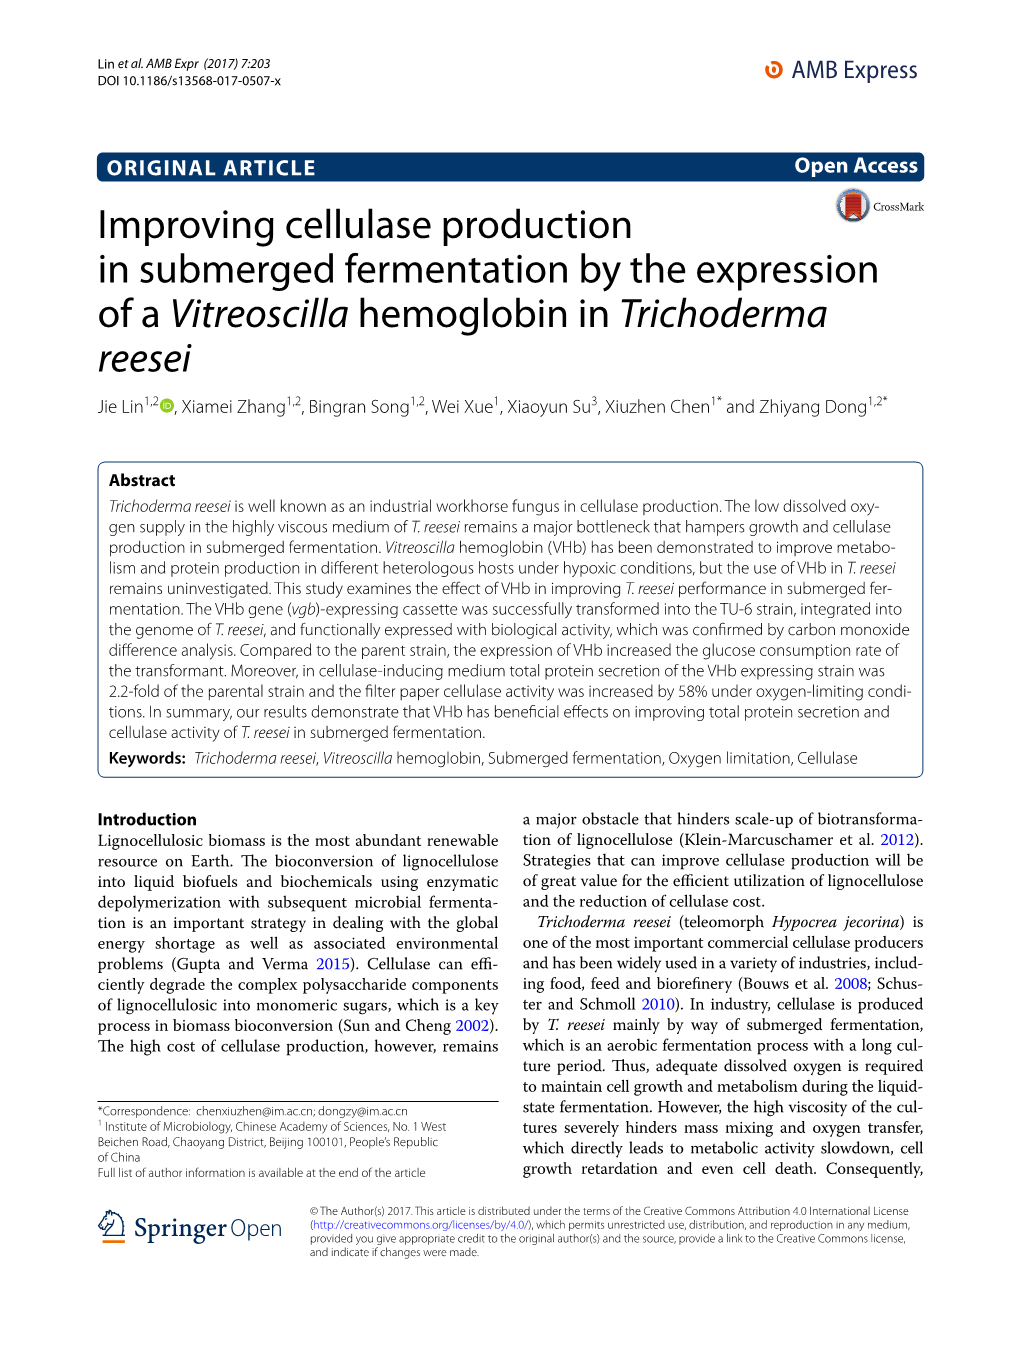 Improving Cellulase Production in Submerged Fermentation by the Expression of a Vitreoscilla Hemoglobin in Trichoderma Reesei